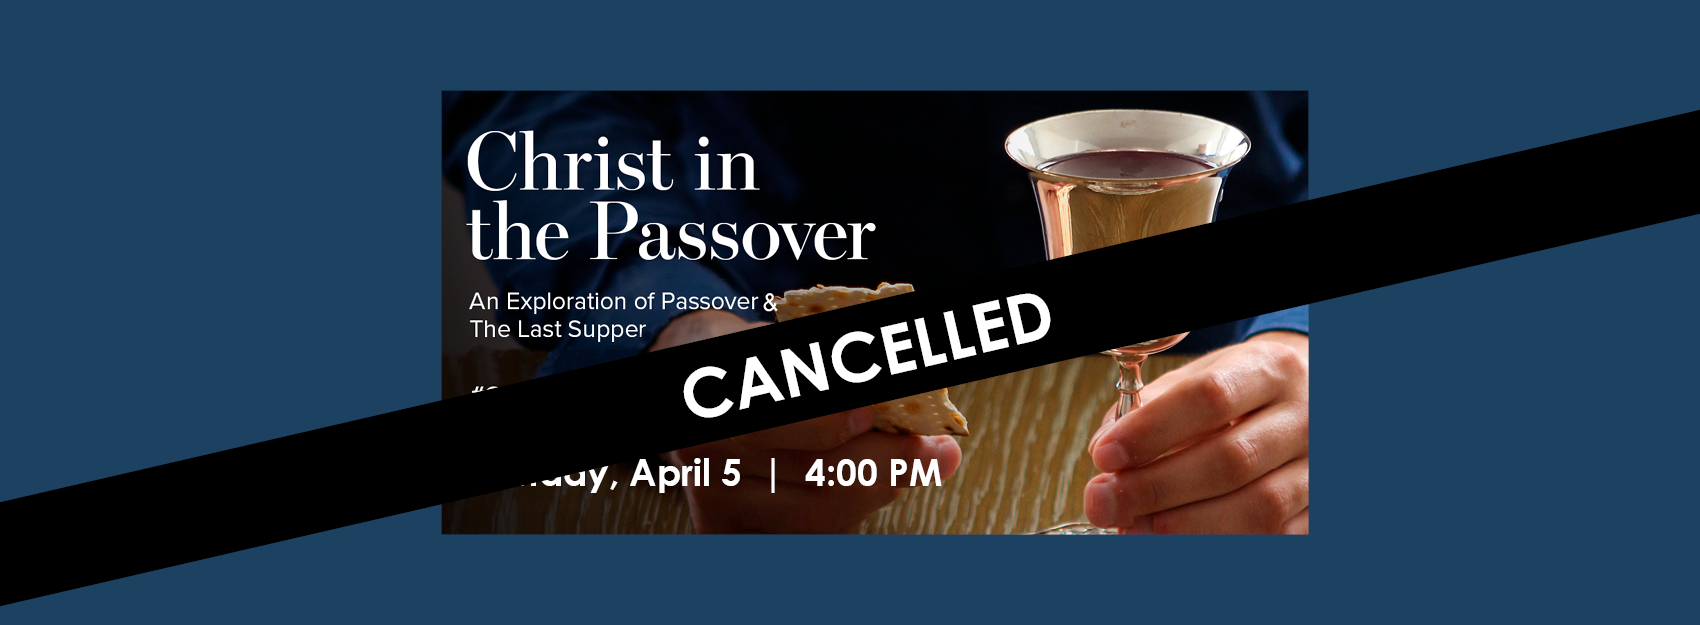 CHRIST IN THE PASSOVER WEB SLIDER_CANCELLED